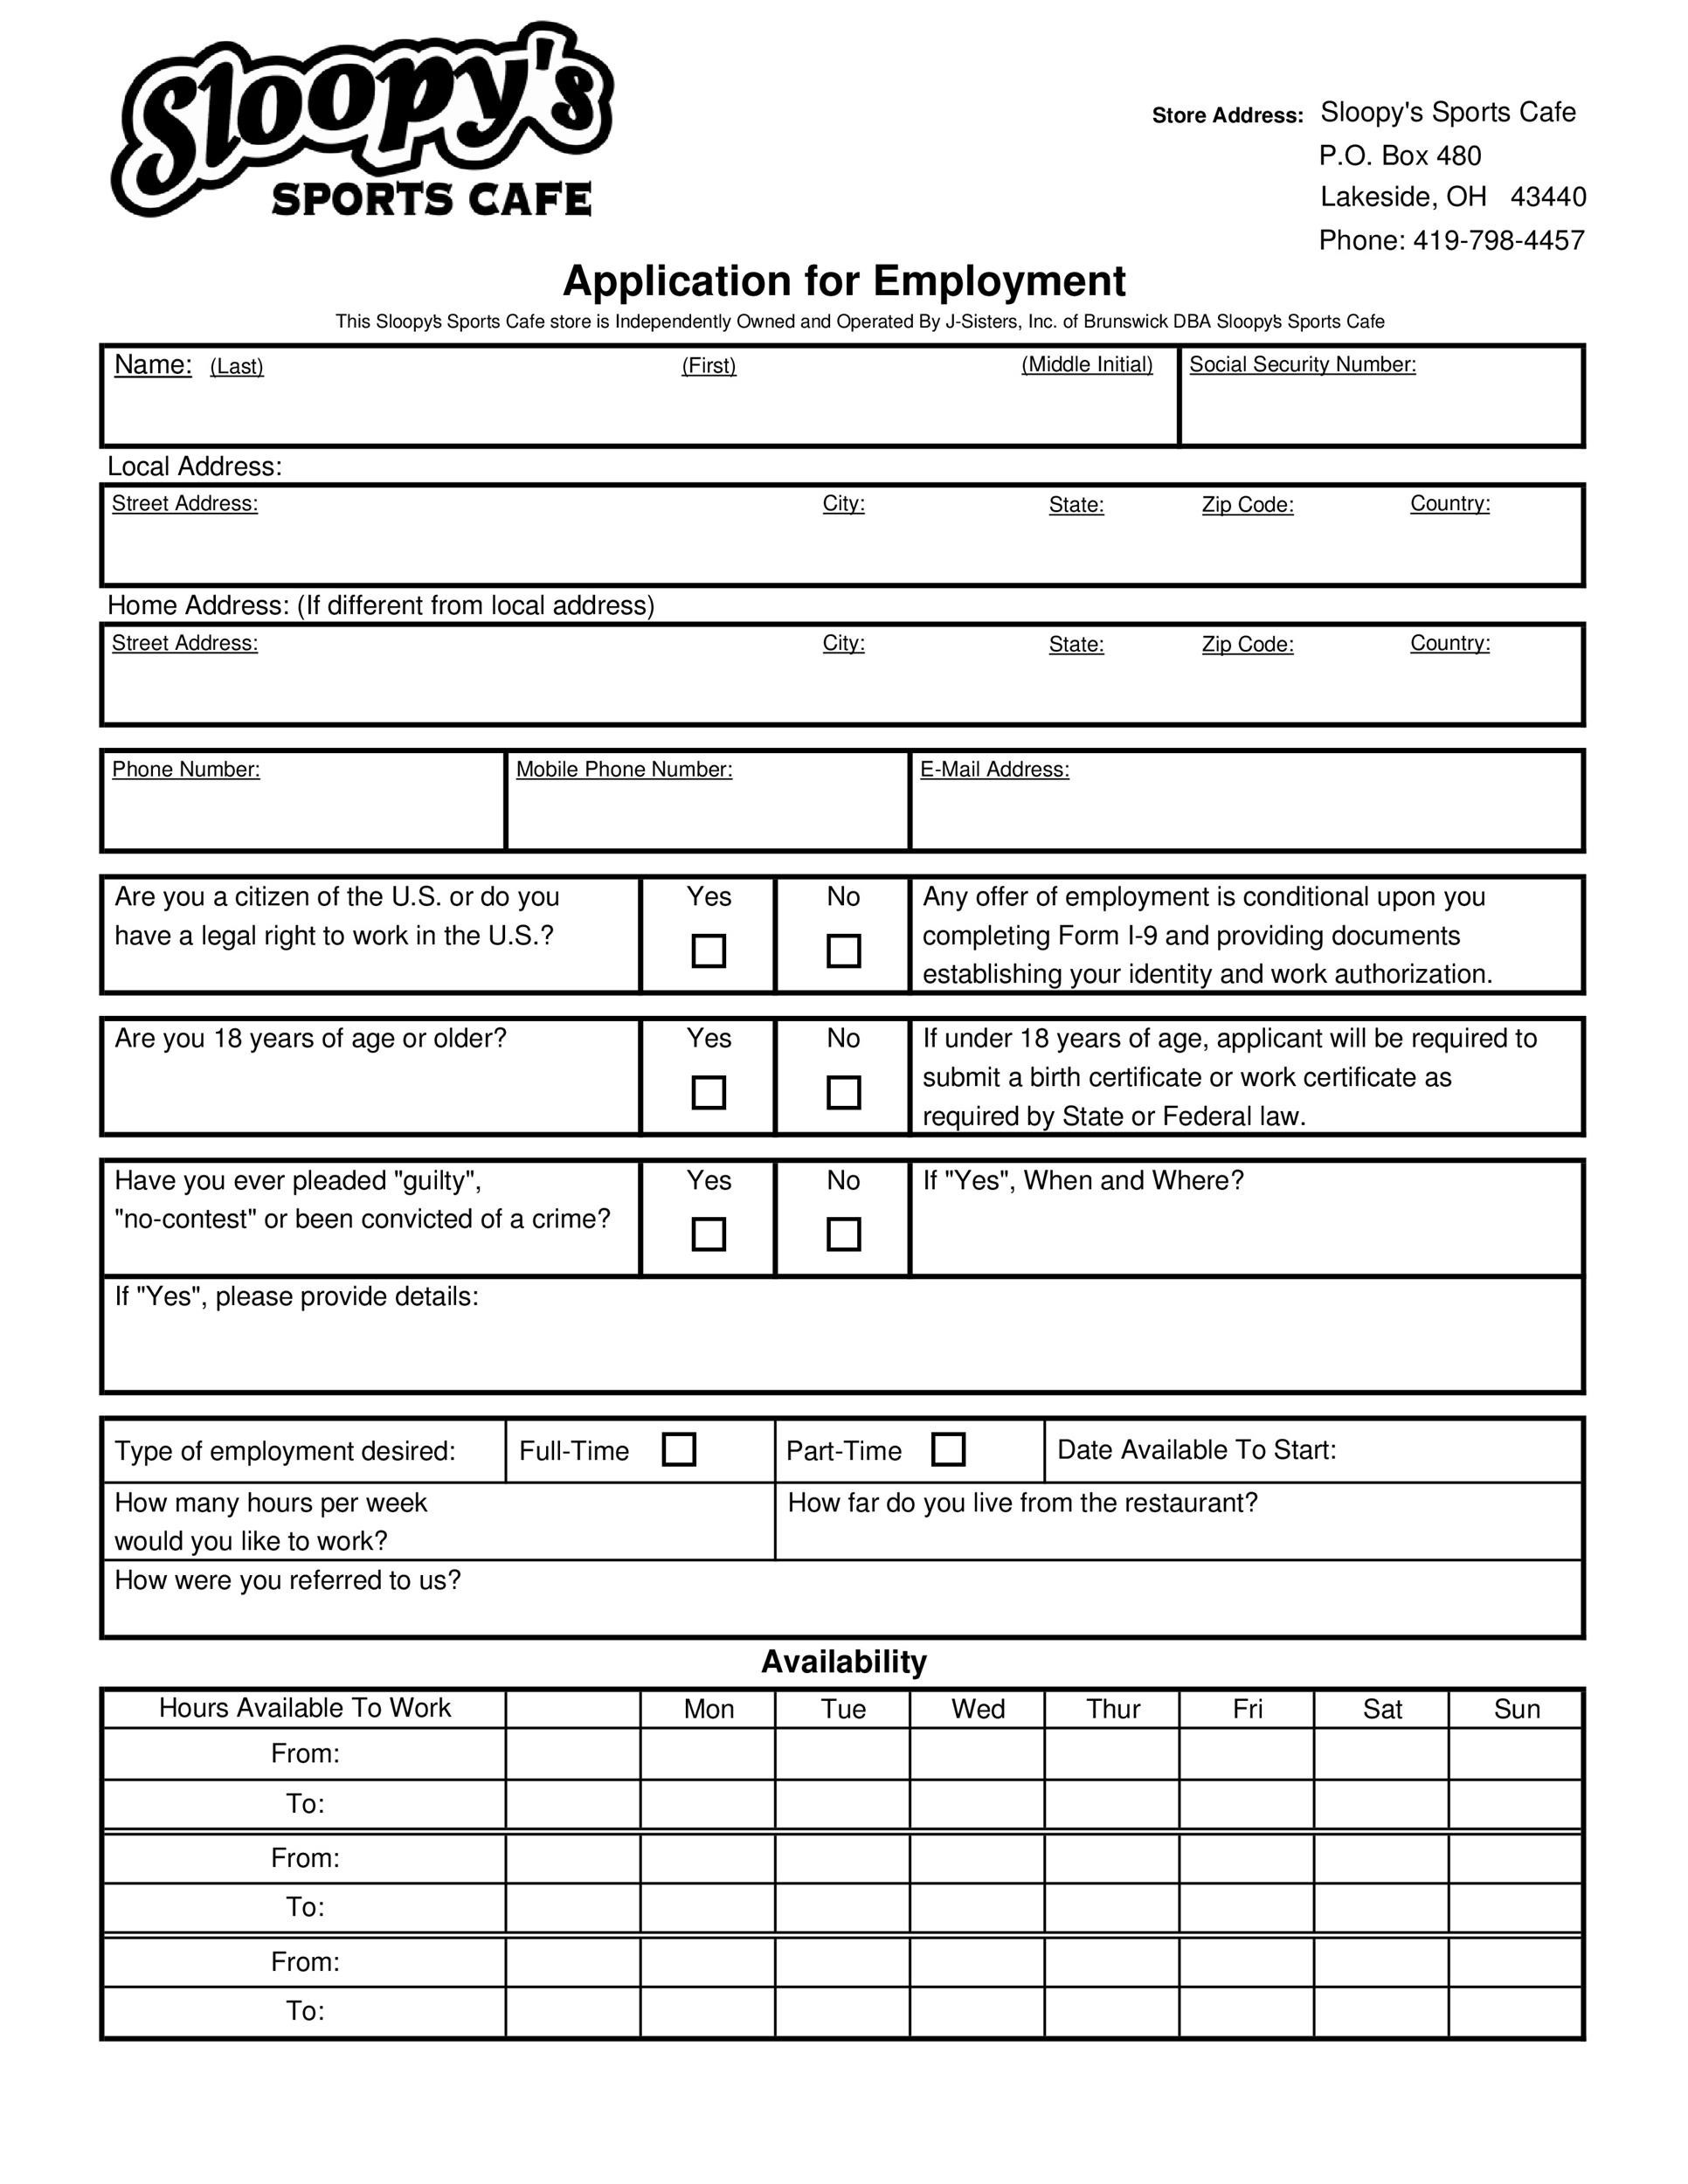 Employee Application Form Template Free from templatelab.com